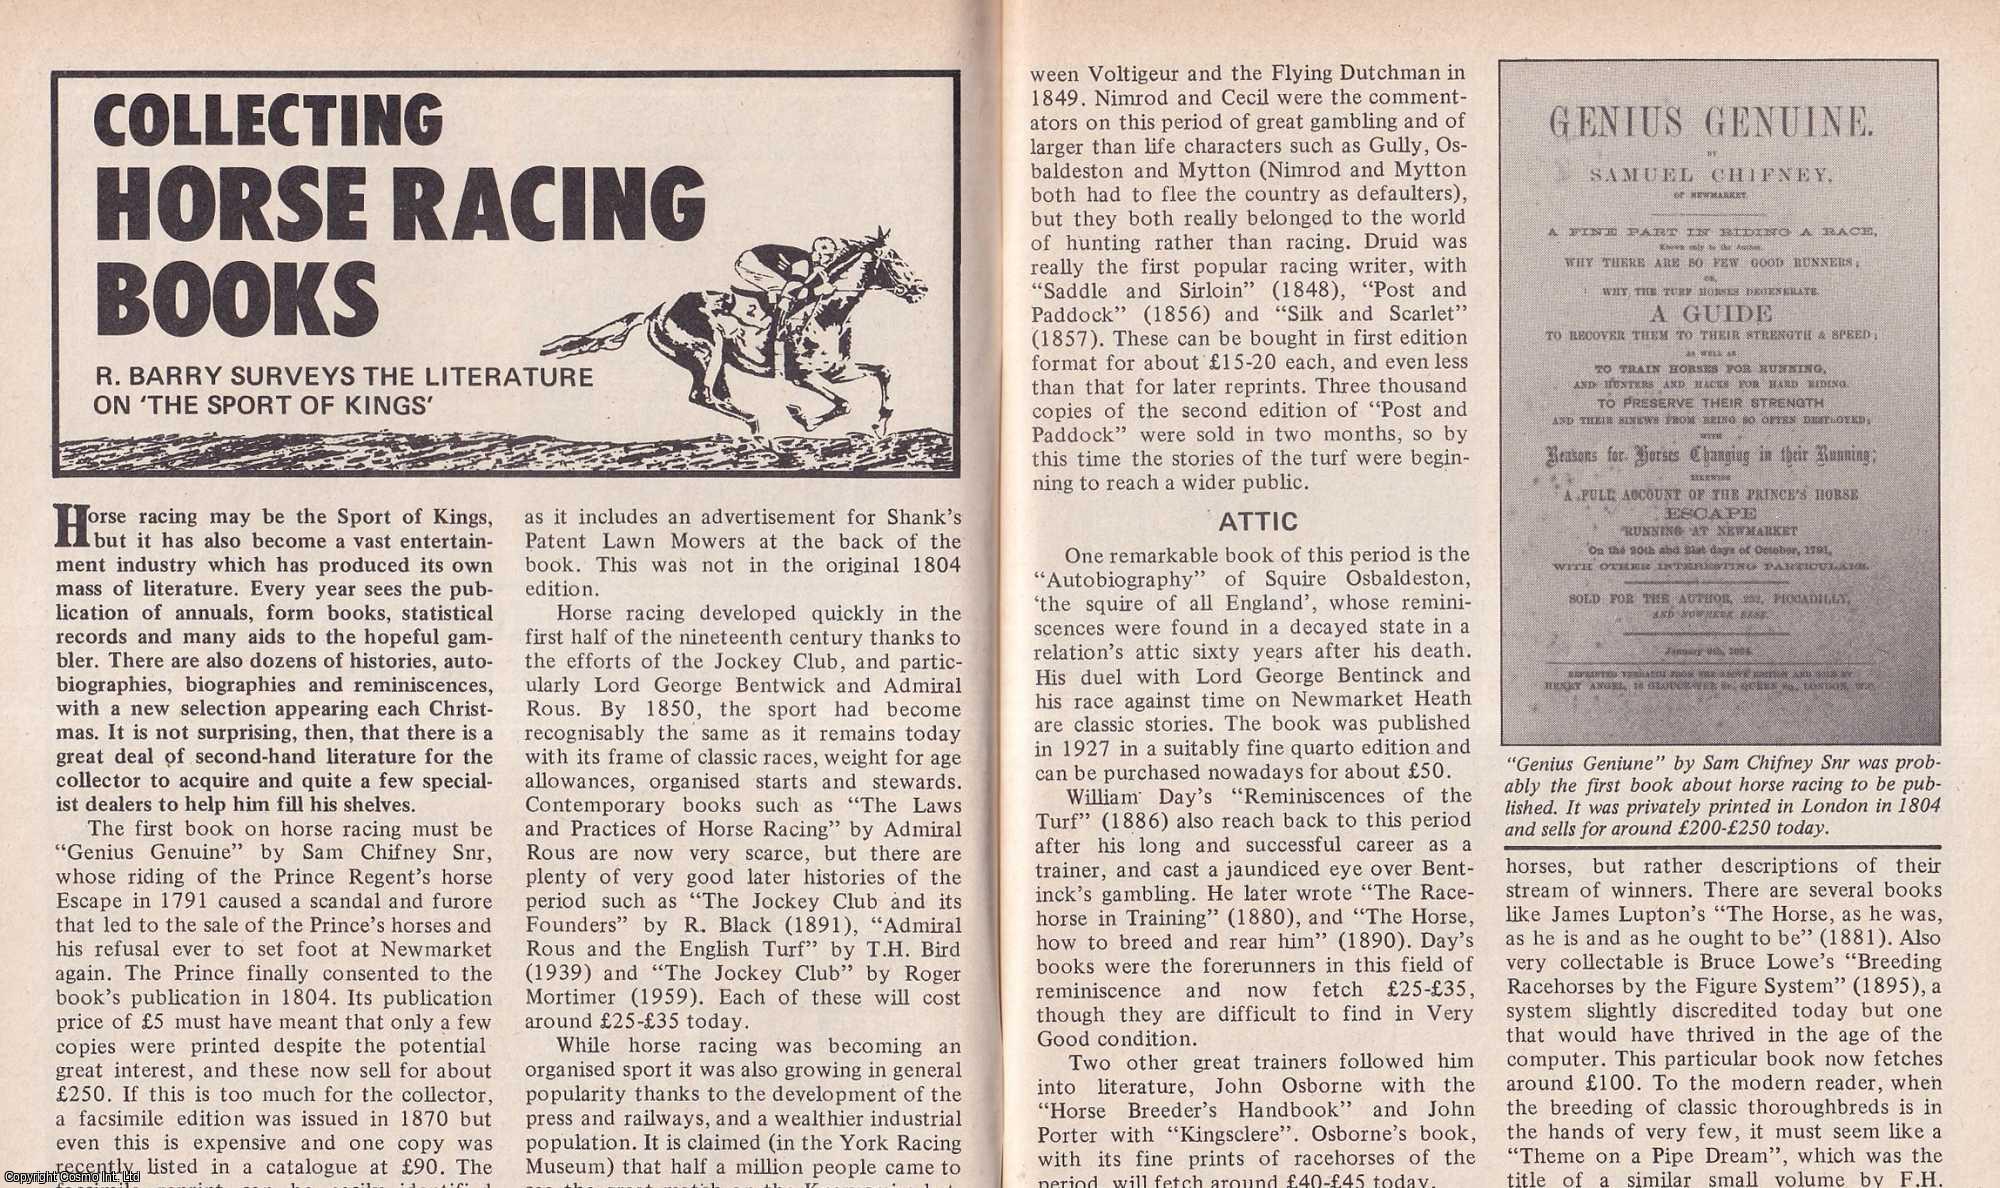 R. Barry - Collecting Horse Racing Books. Surveying The Literature on The Sport of Kings. This is an original article separated from an issue of The Book & Magazine Collector publication.